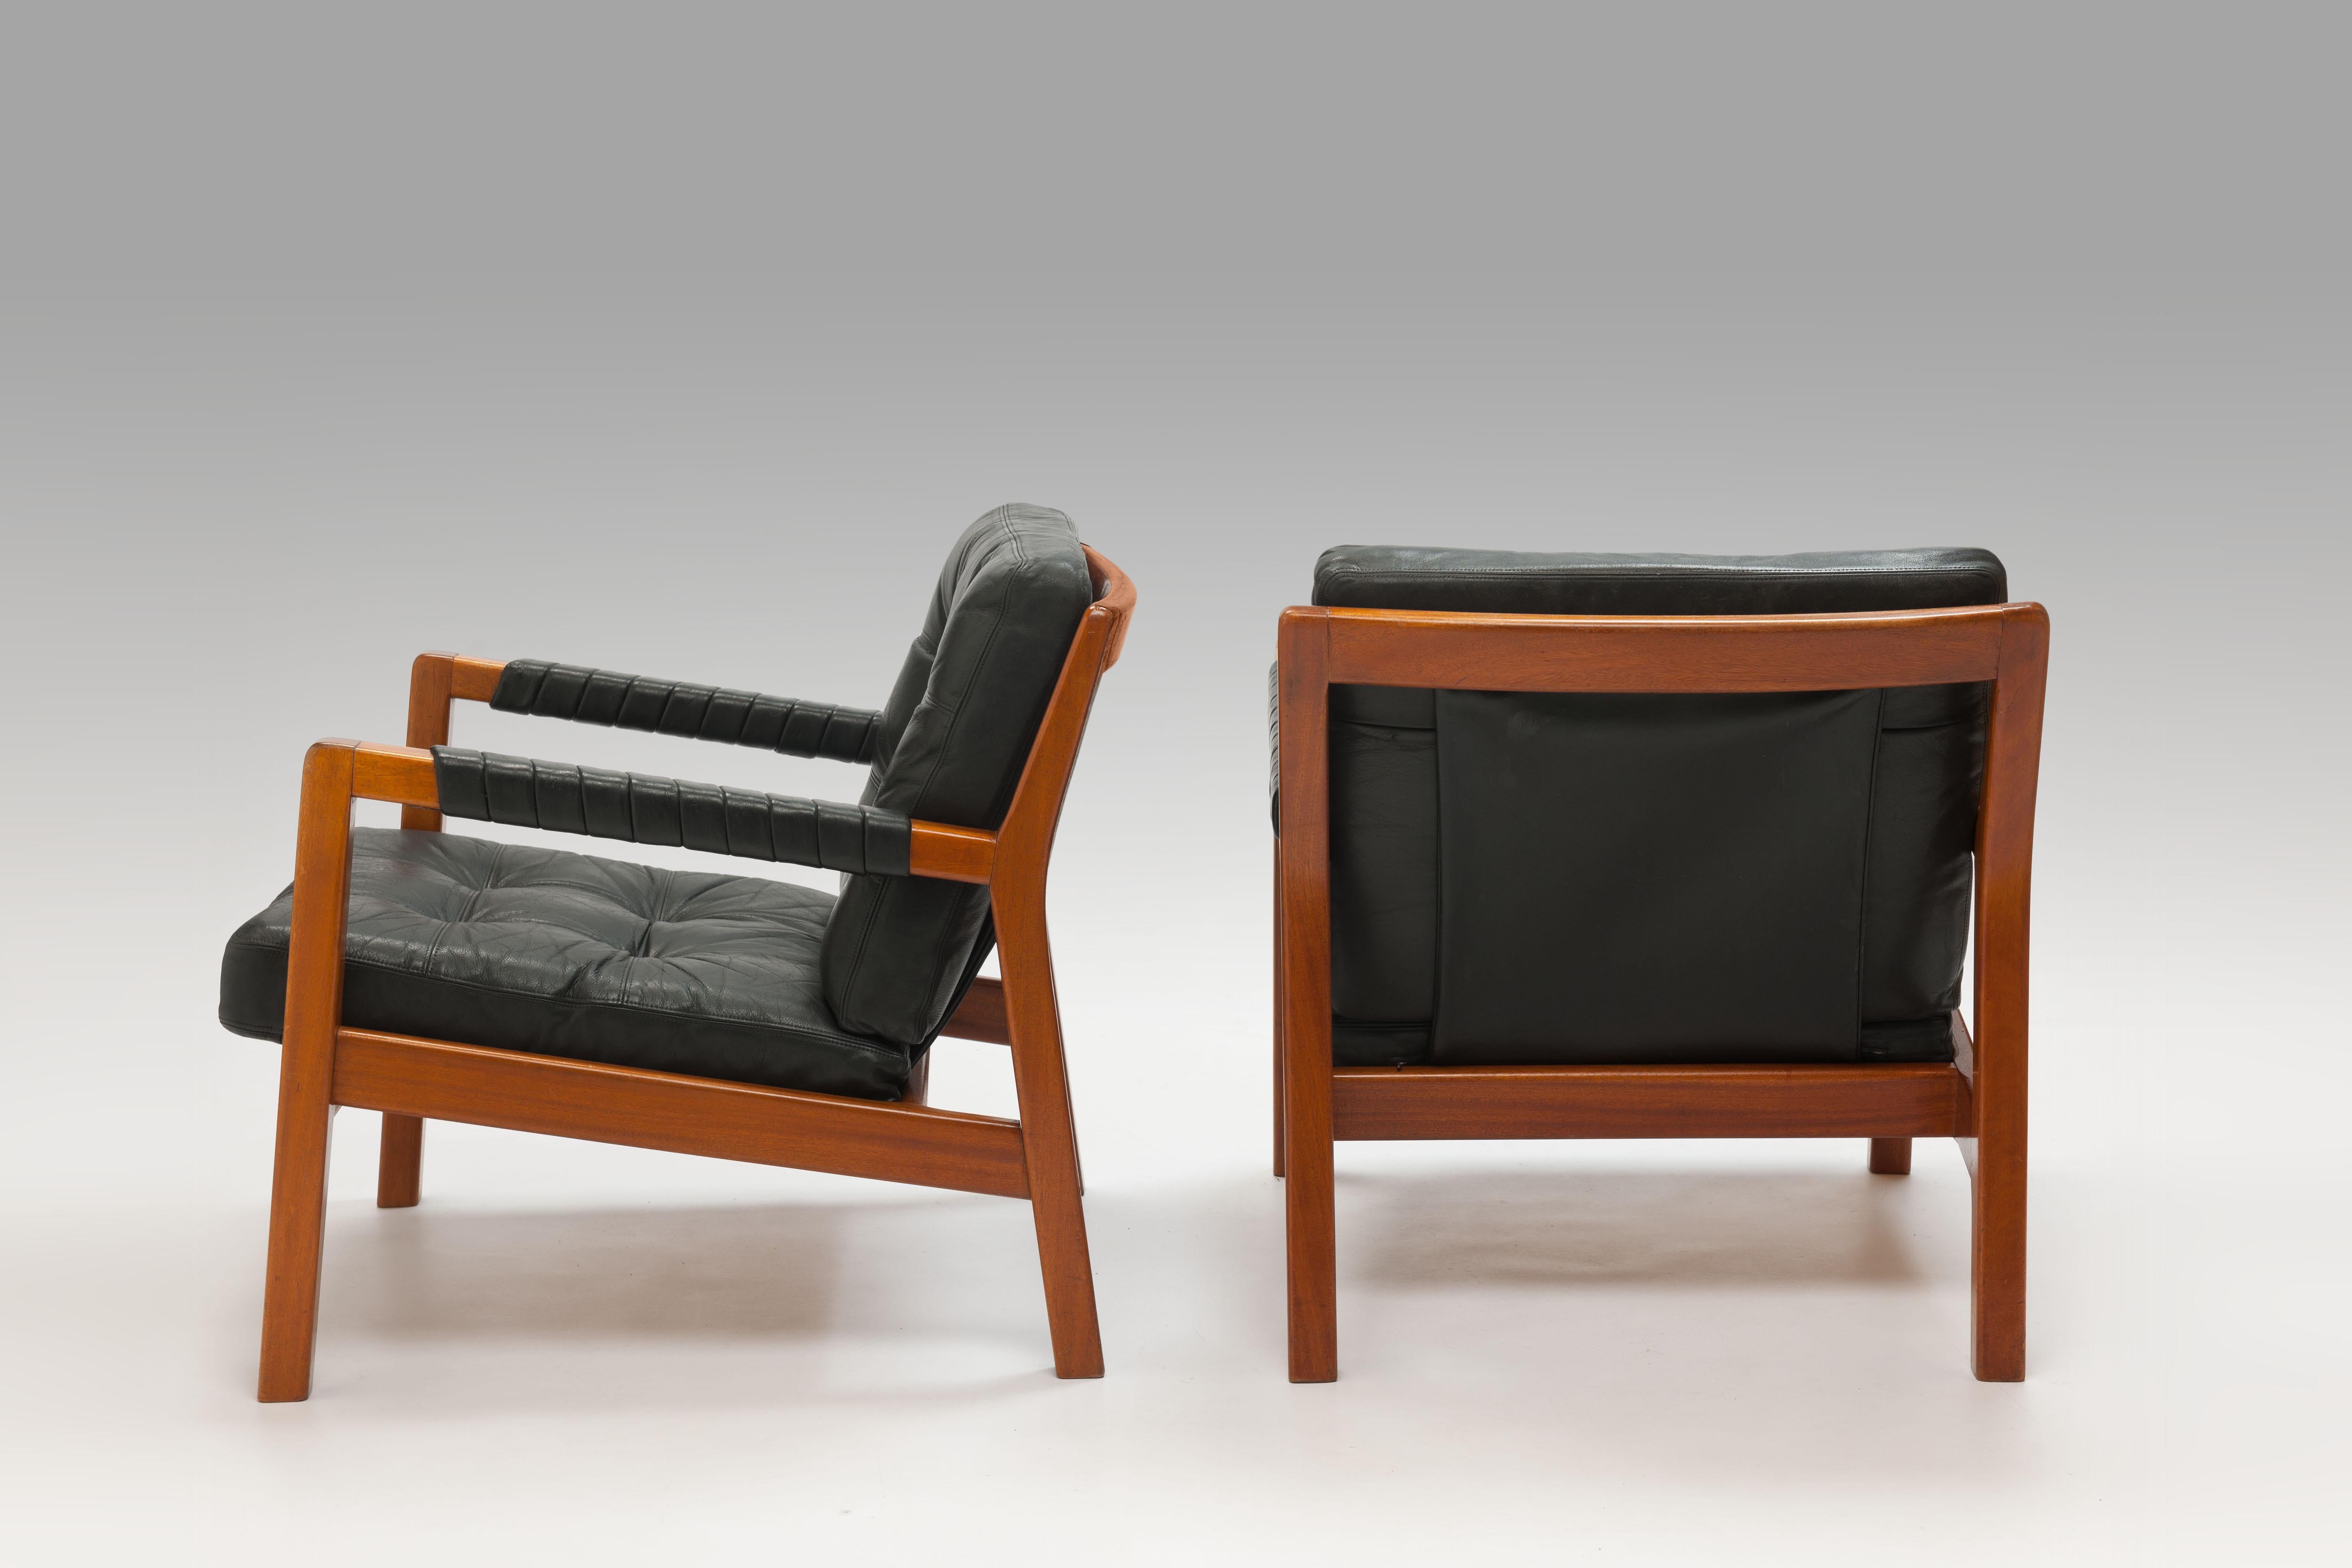 Chair 'Rialto's streamlined design and refined details engage in a fascinating dialogue. The beautiful signature leather-wrapped armrests give strength to Rialto's unique appearance, which especially comes to it's own when the chairs are placed